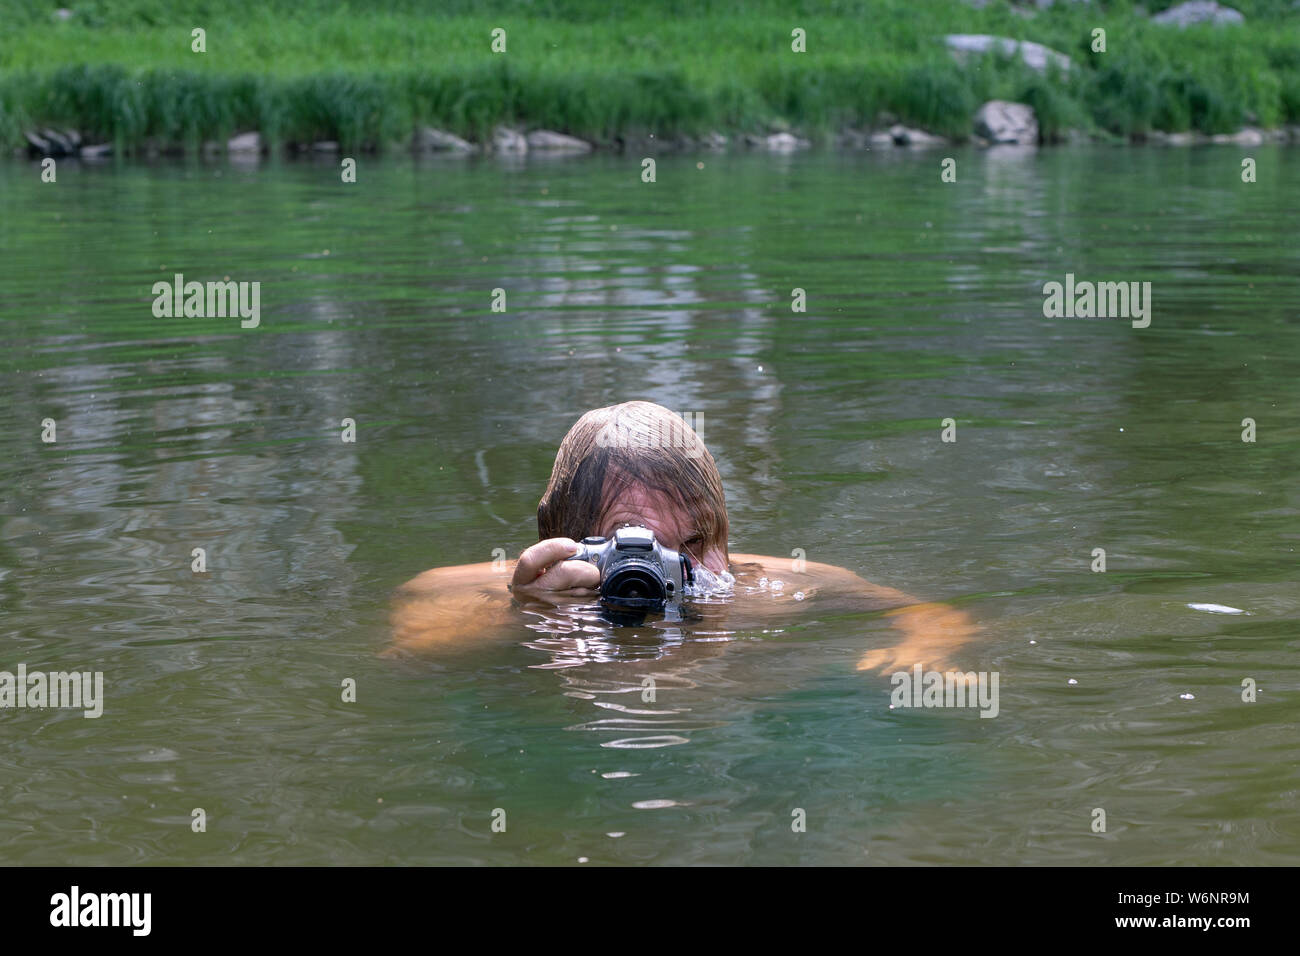 a man aged plunged into the water looking or peeping through a waterproof camera, photographer Stock Photo